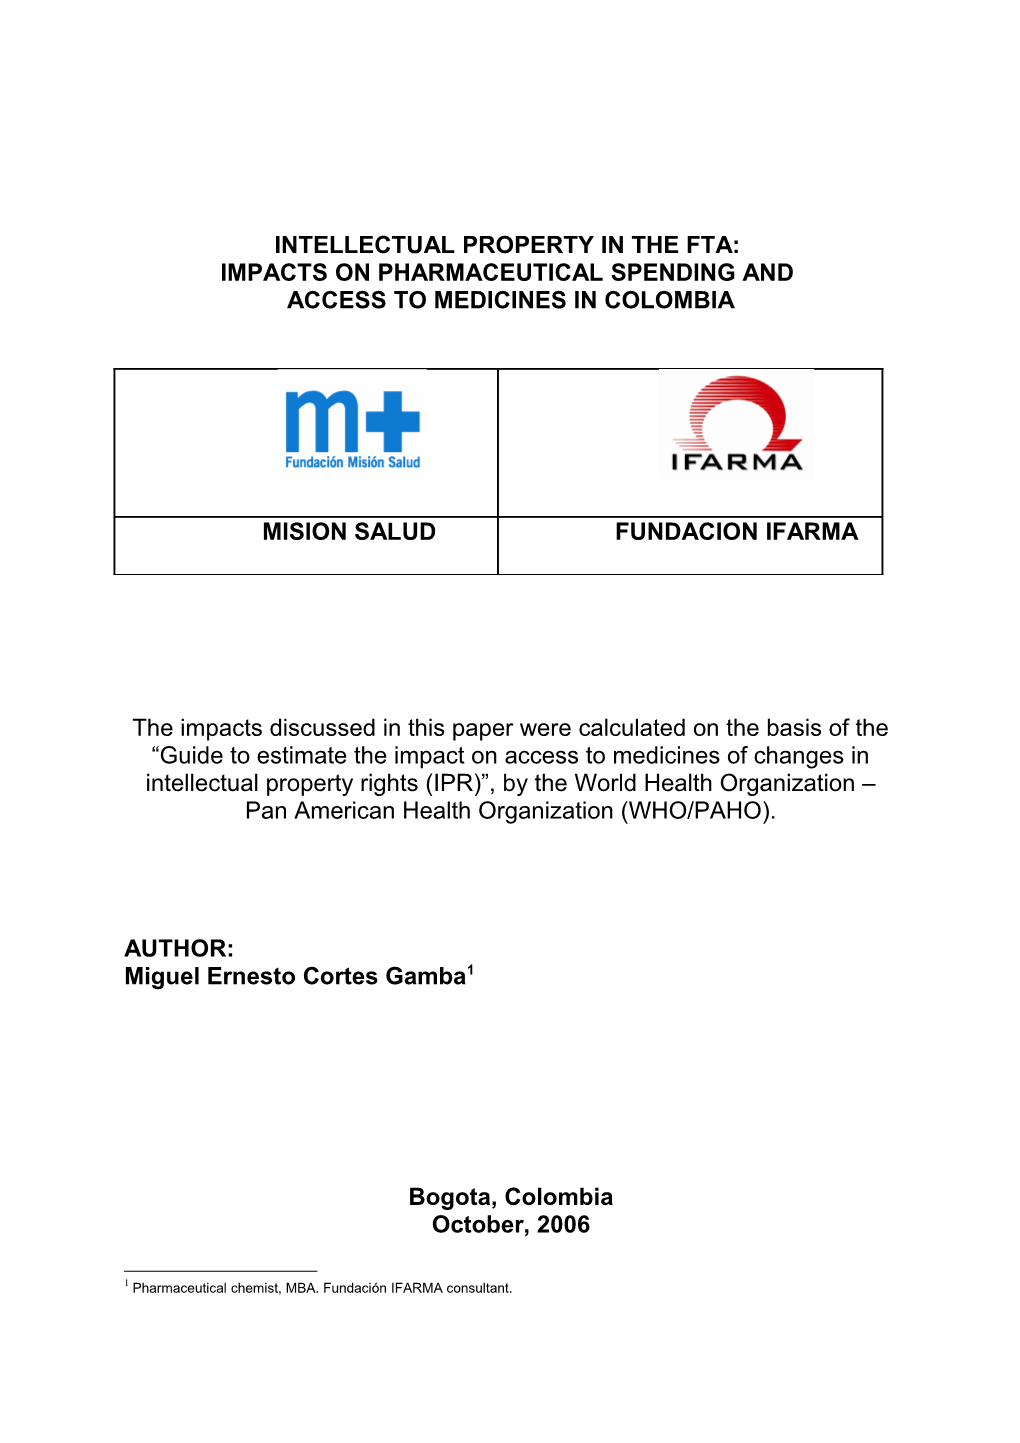 Intellectual Property in the FTA: Impacts on Drug Spending and Access to Medicines in Colombia